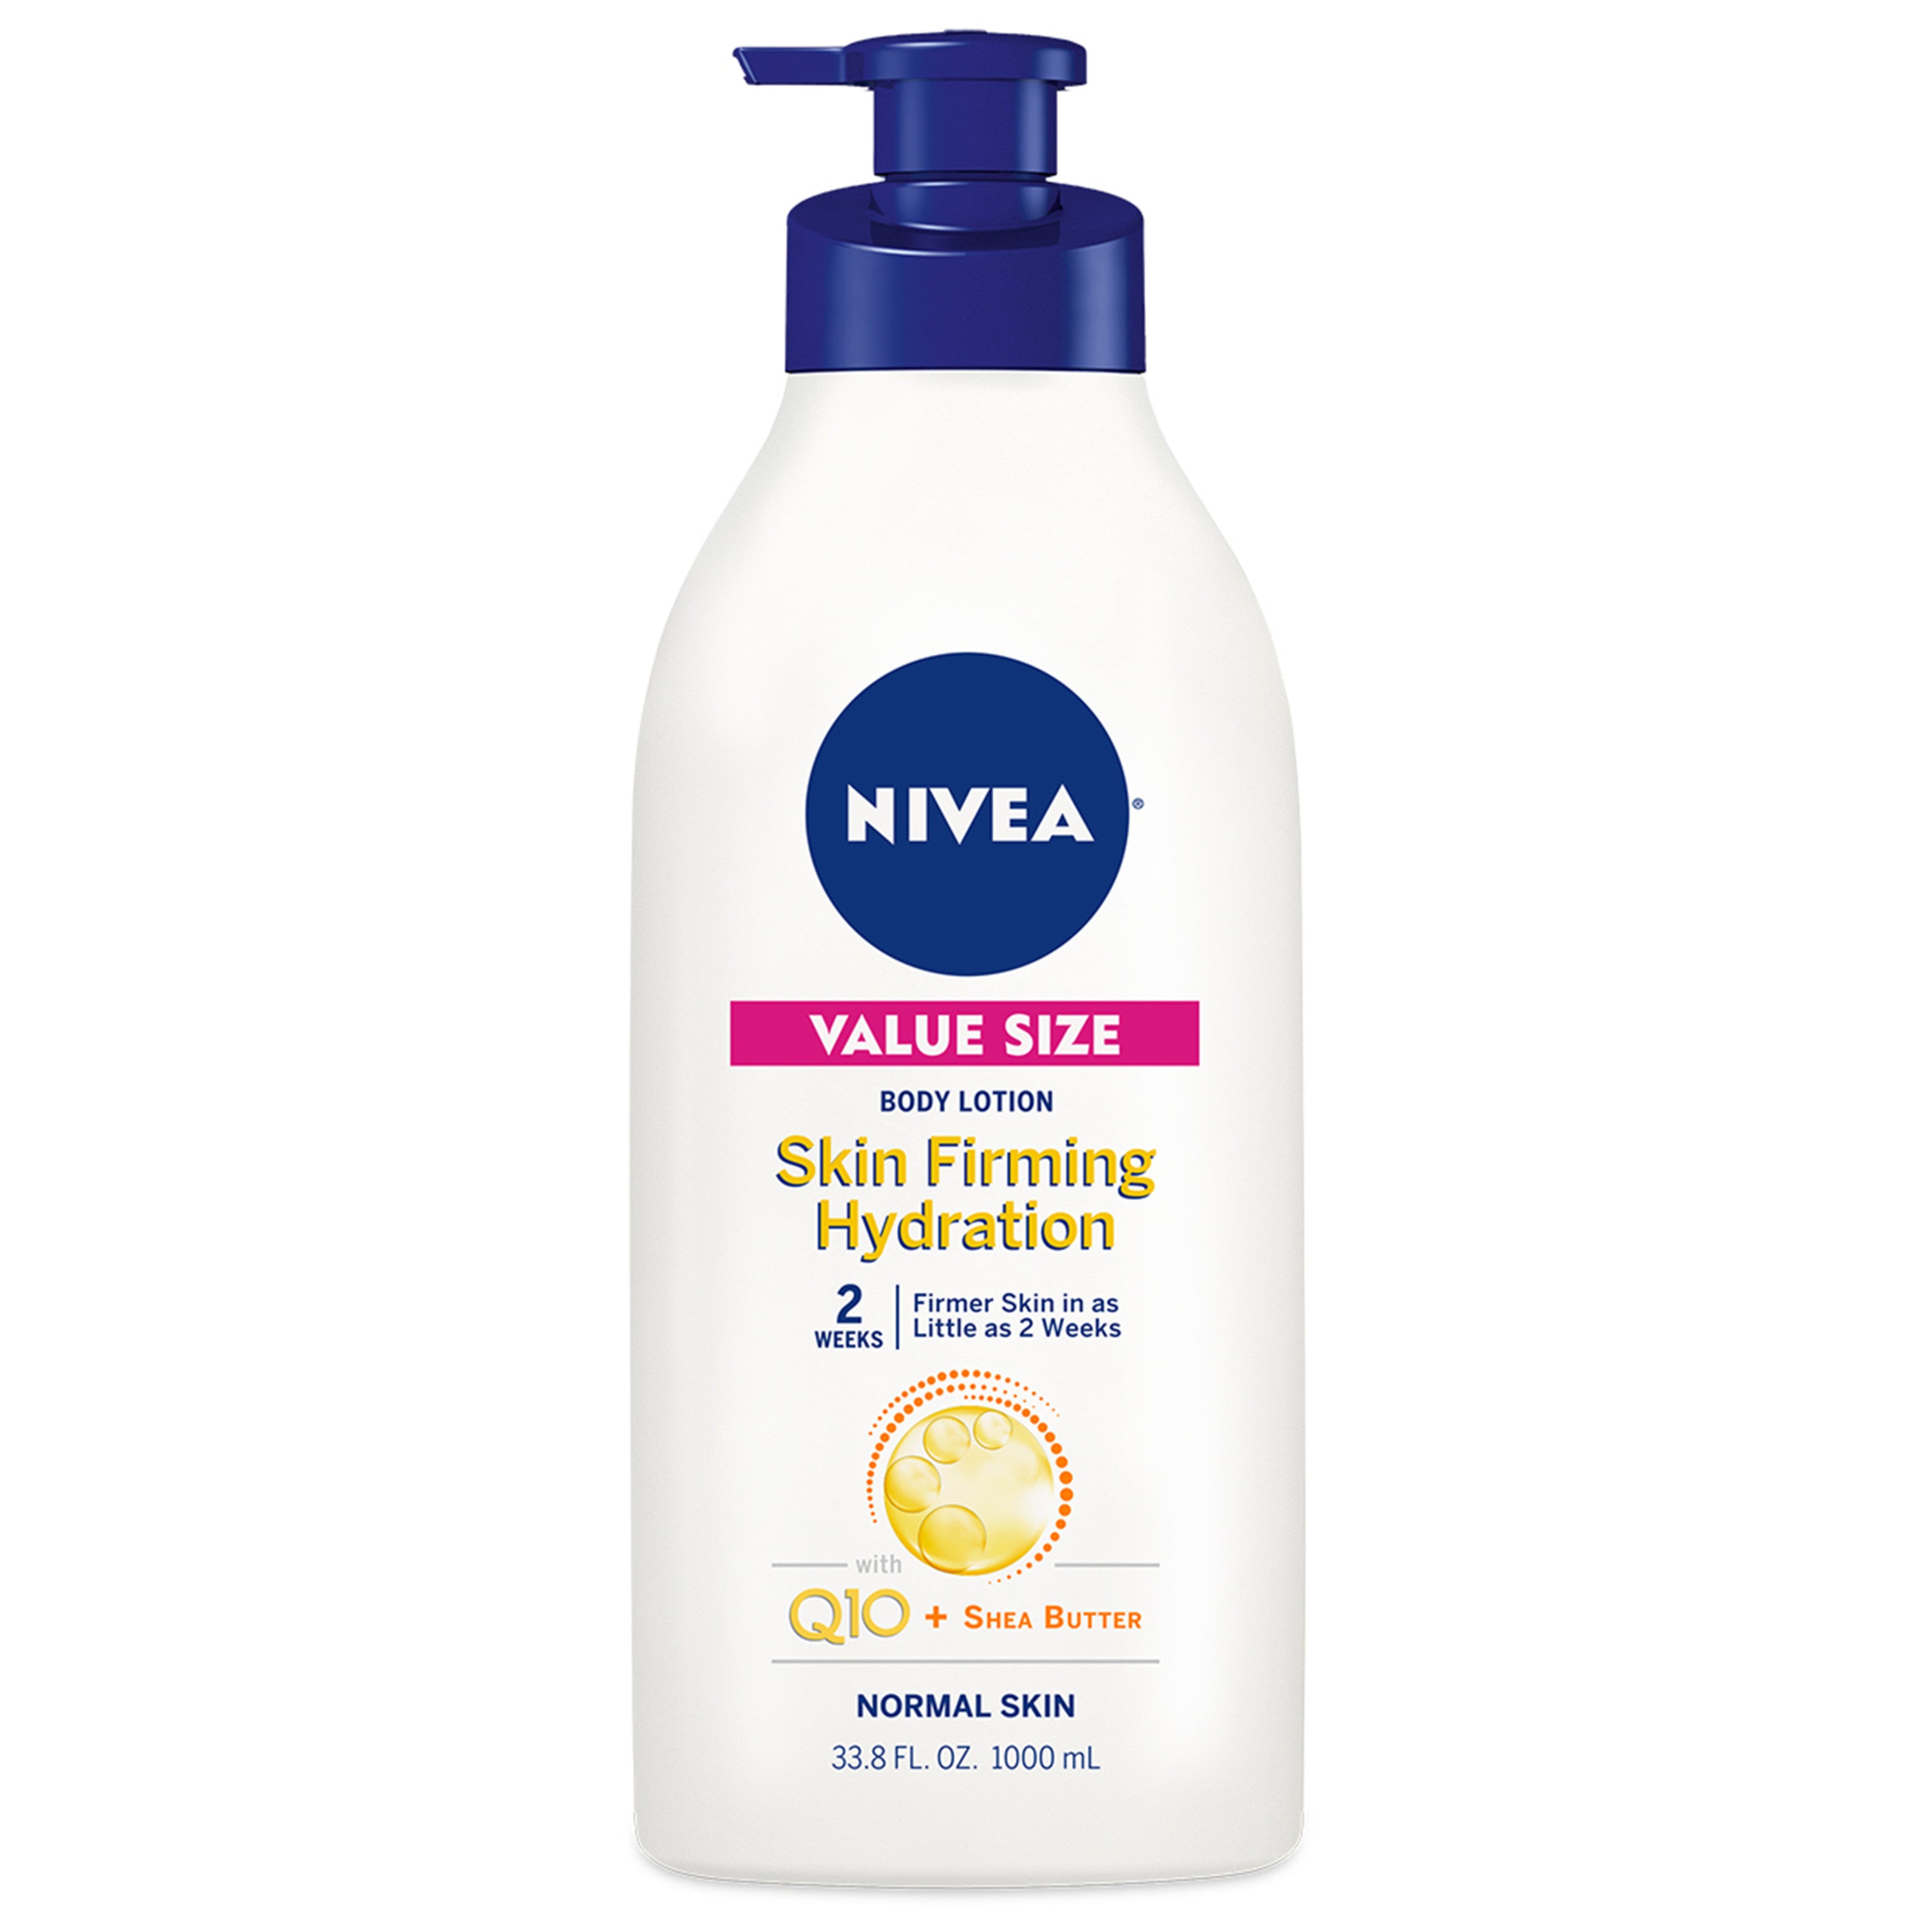 NIVEA Skin Firming Hydration Body Lotion with Q10 and Shea Butter, 33.8 Fl Oz Pump Bottle | MTTS203